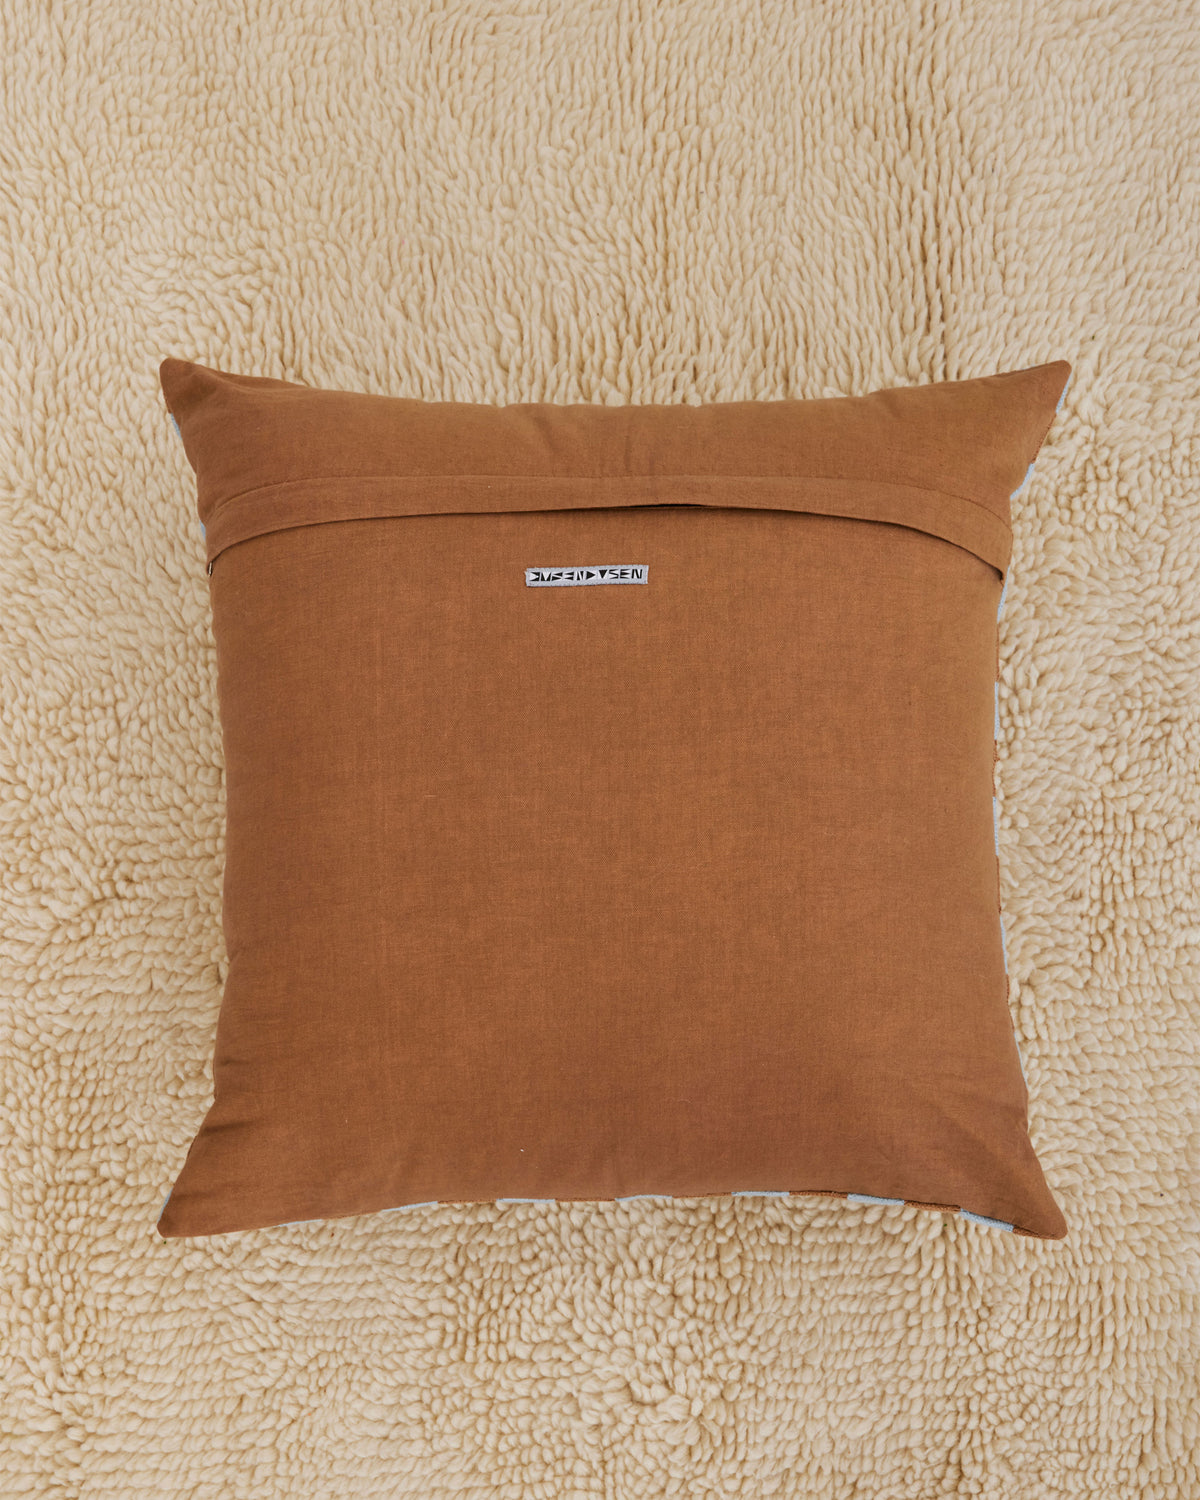 Dusen Dusen Basket Pillow. Basket pillow in multi-color check print. 100% cotton tufted pillow. Natural canvas back with zip closure. Available as 24" x 24". Spot clean only. Made in India.